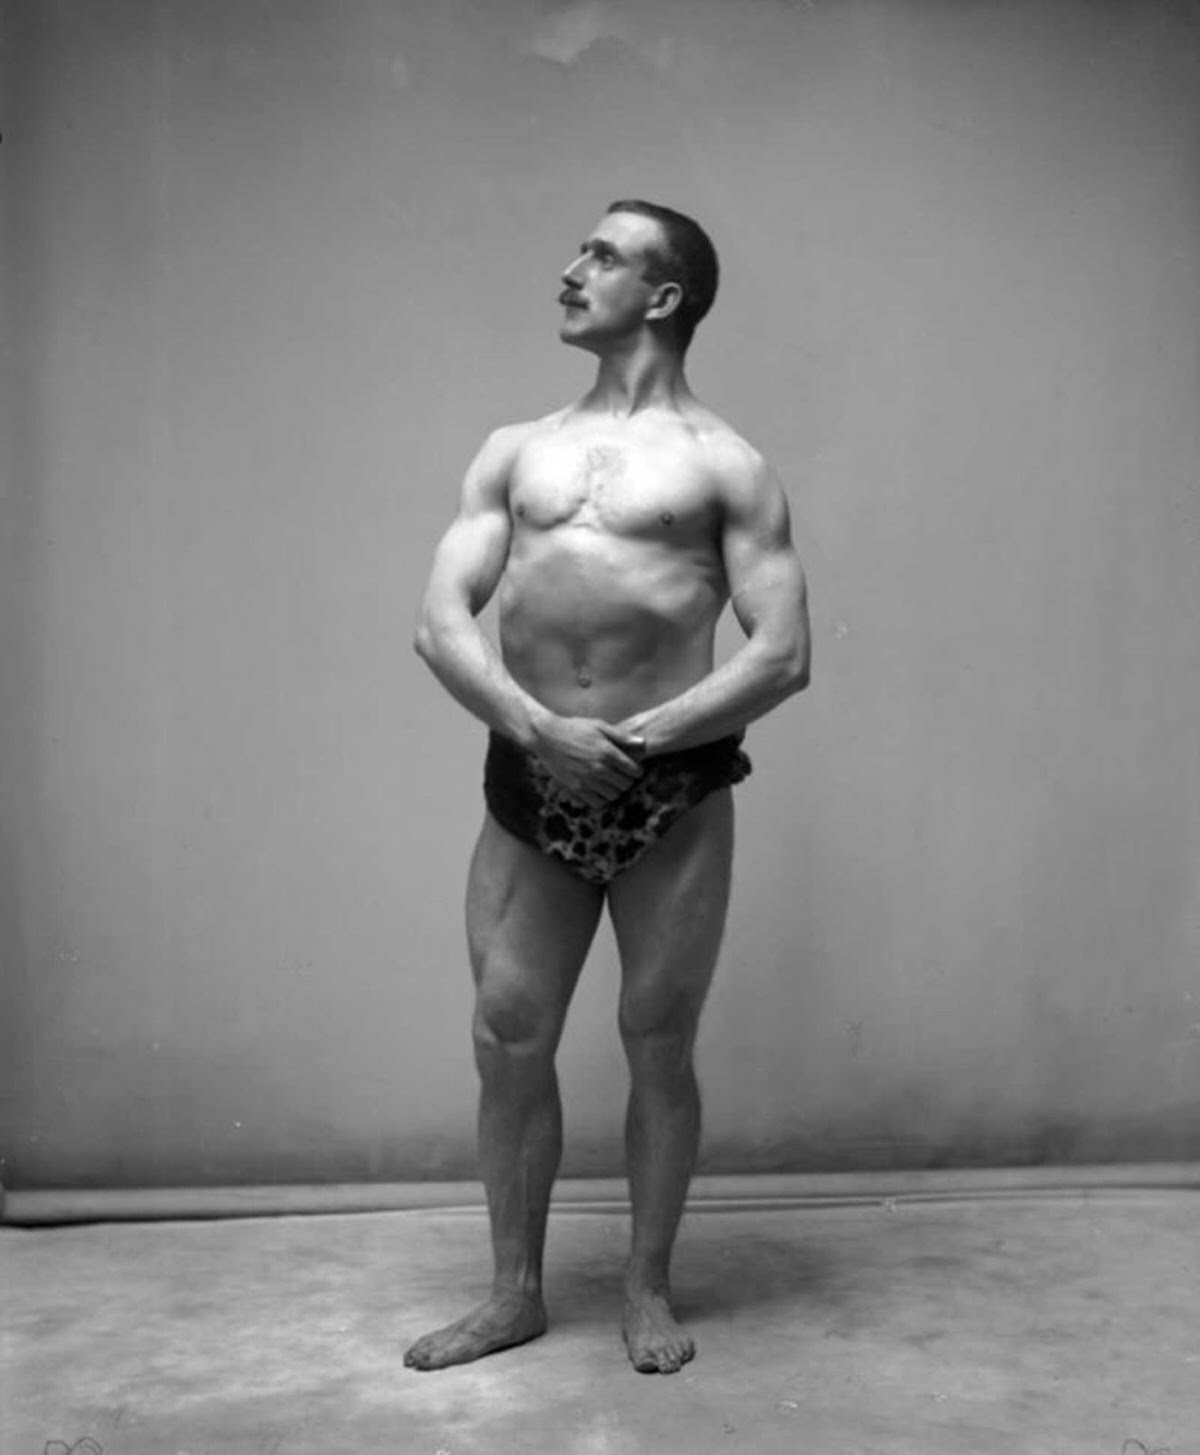 Mr. Murray, winner of the Sandow bodybuilding competition in 1905.